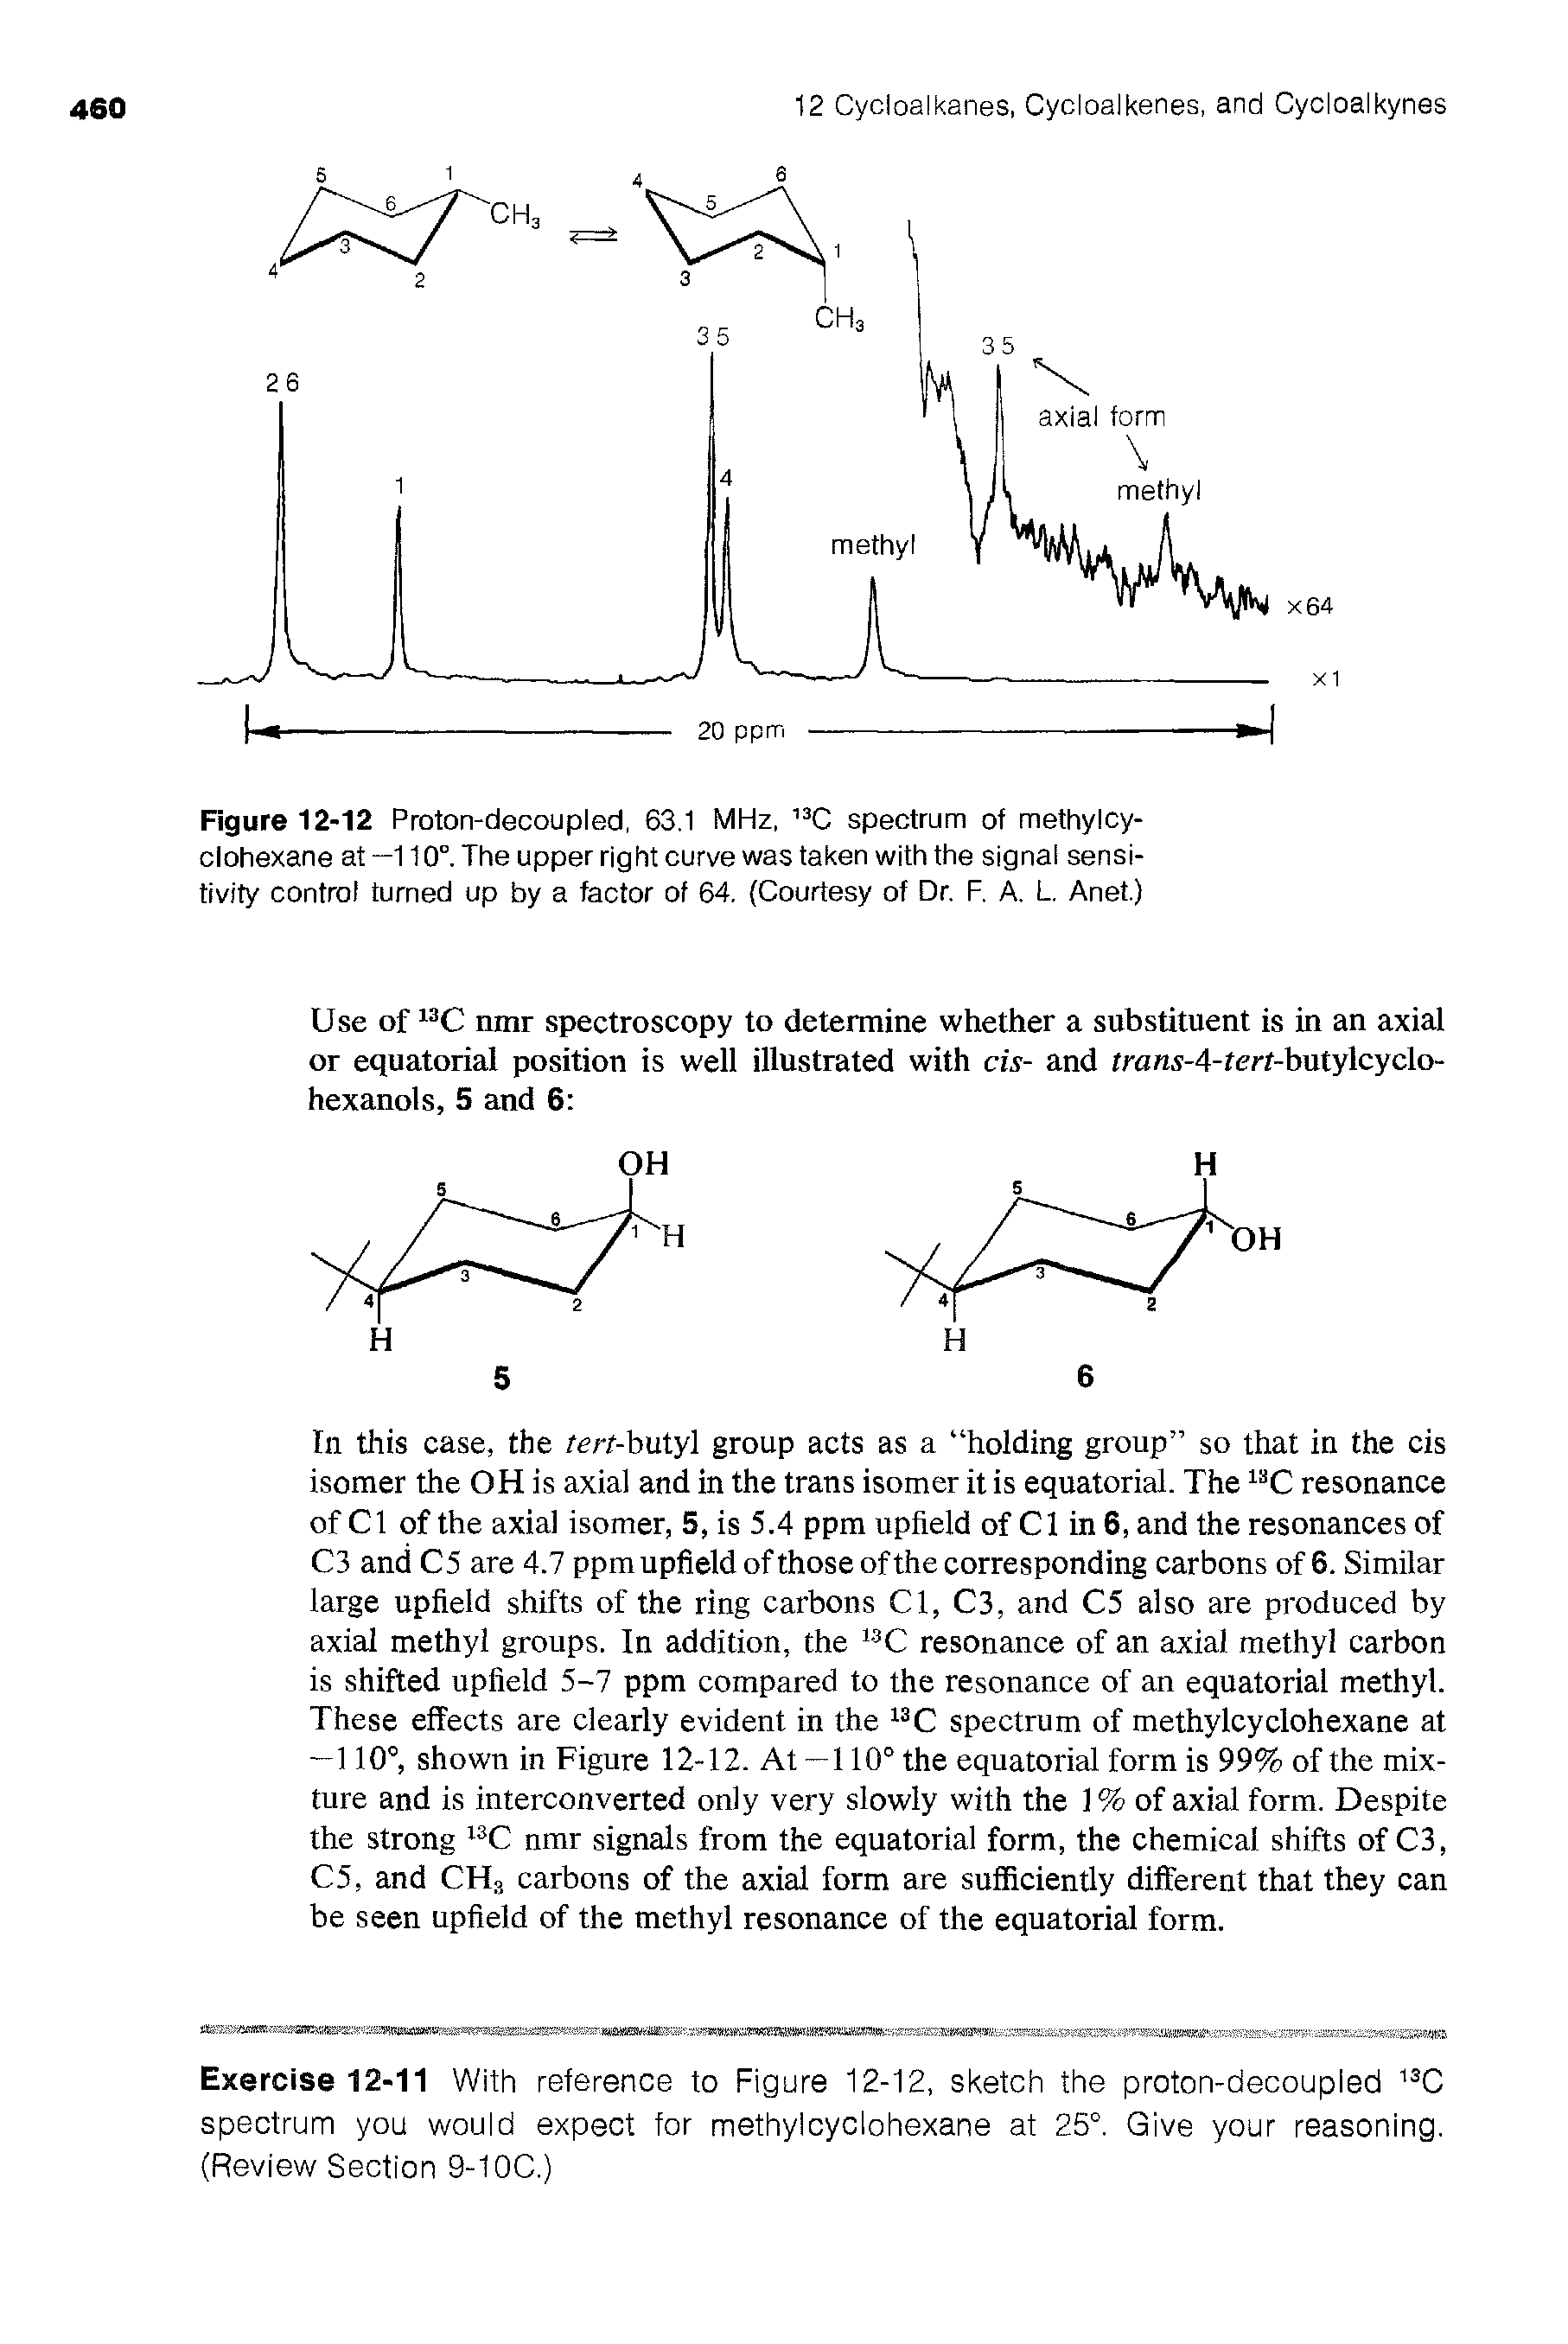 Figure 12-12 Proton-decoupled, 63.1 MHz, 13C spectrum of methylcy-clohexane at—110°. The upper right curve was taken with the signal sensitivity control turned up by a factor of 64. (Courtesy of Dr. F. A. L. Anet.)...